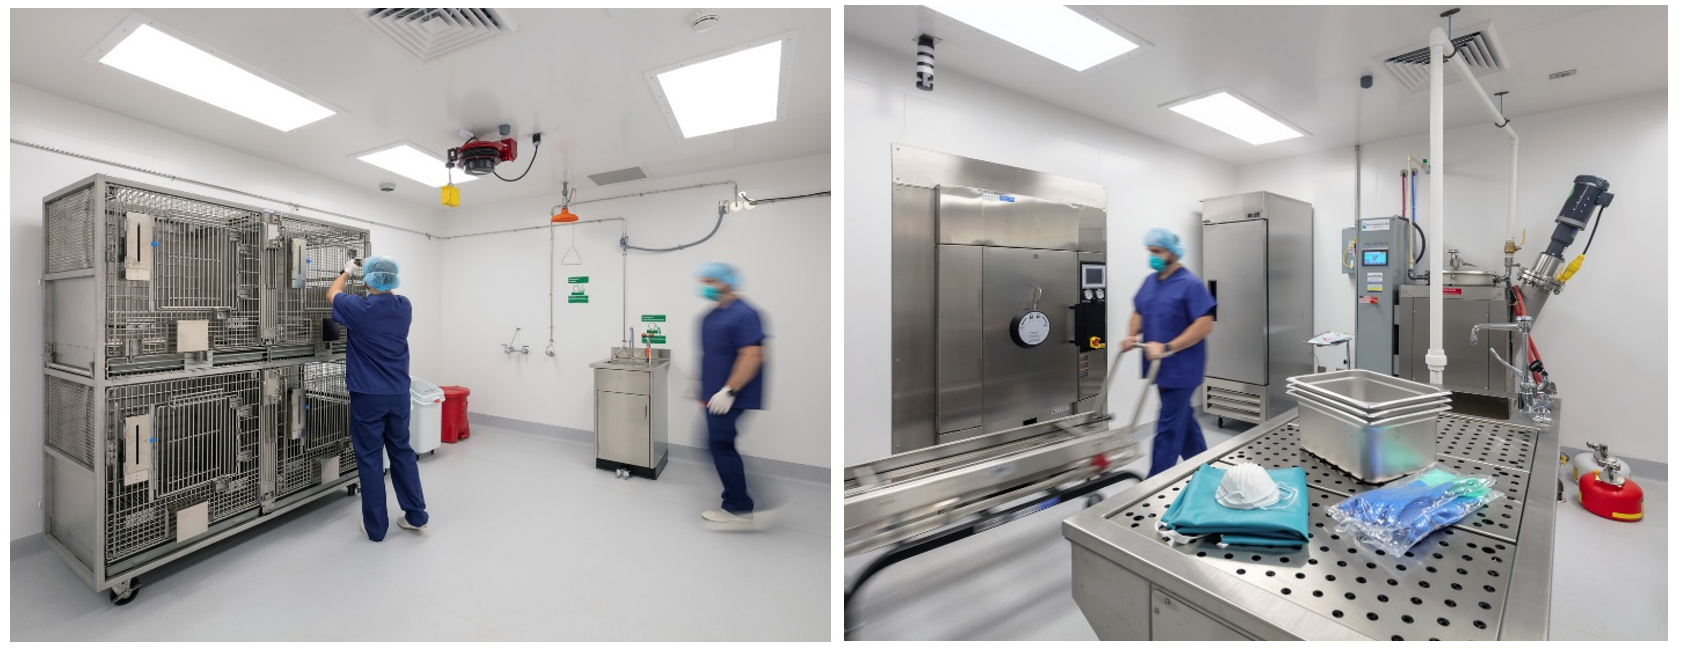 Two images side by side. The left image shows individually vented cage racks for future rodent studies, and the right image shows people within an ABSL-3 research facility.